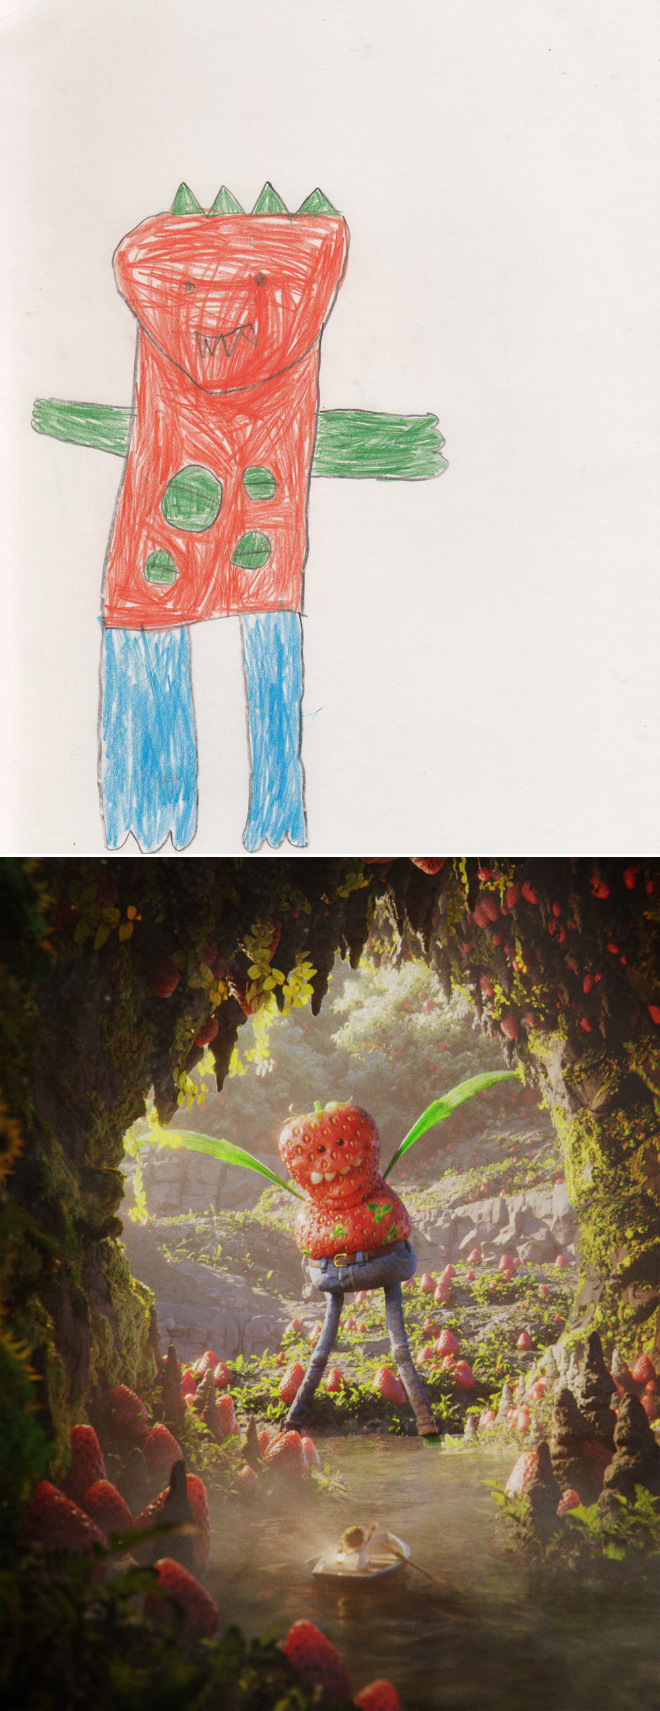 When kids' doodles get recreated by a professional artist.